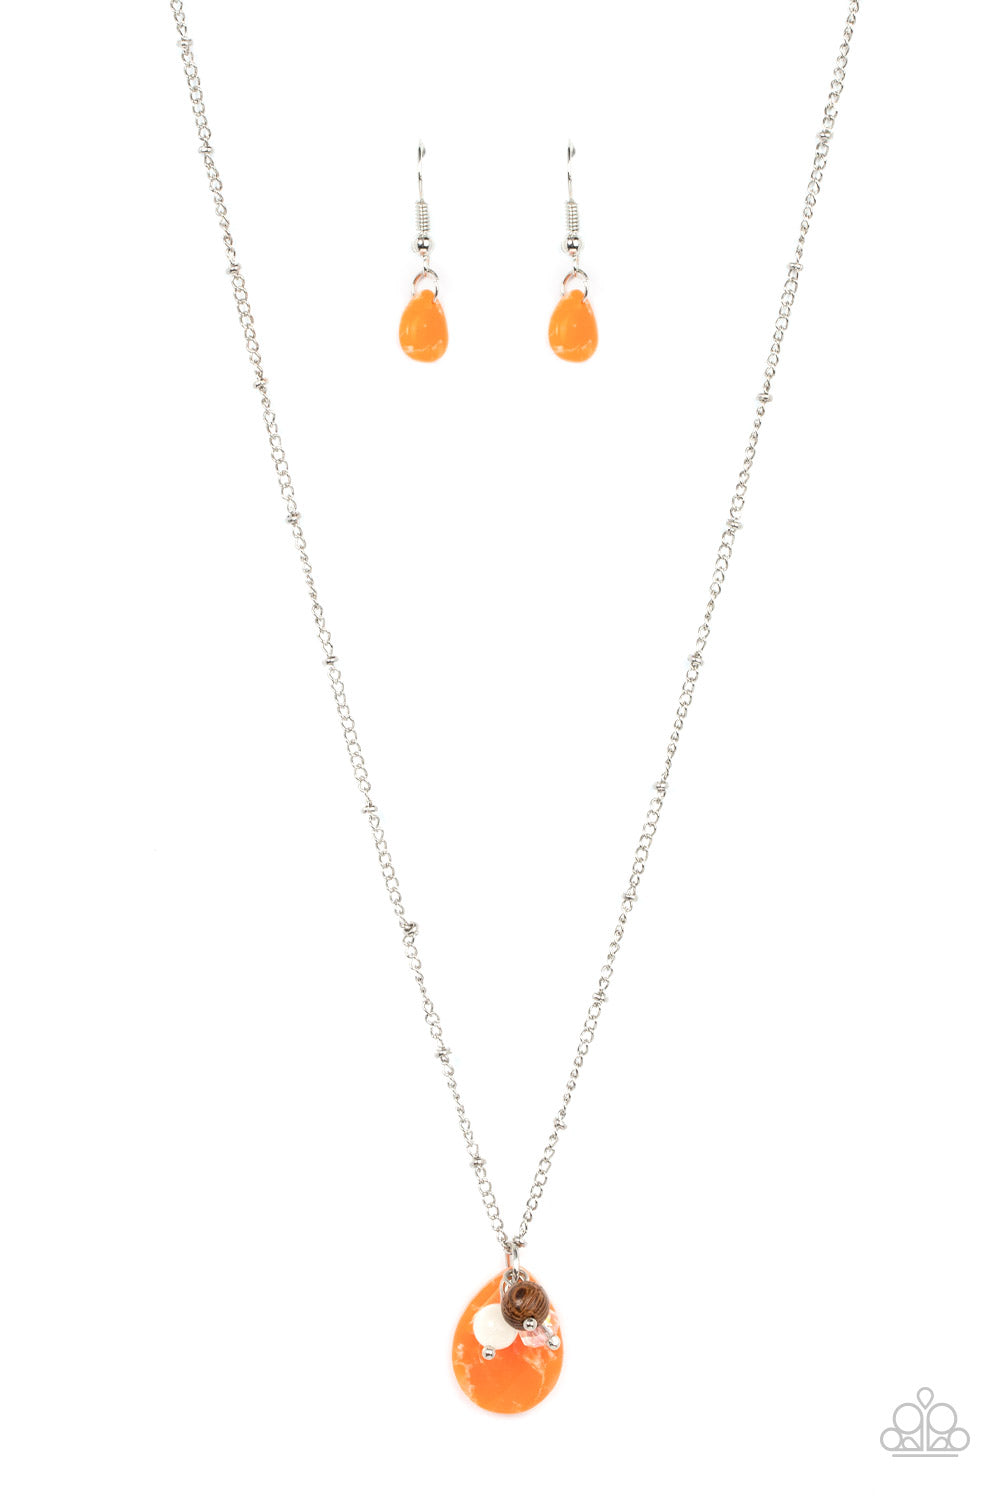 Cherokee Canyon - Orange - Paparazzi  An earthy cluster of wooden, crystal-like, and quartz stone beads joins an enchanting orange stone teardrop at the bottom of a dainty silver satellite chain, resulting in a tranquil pendant below the collar.